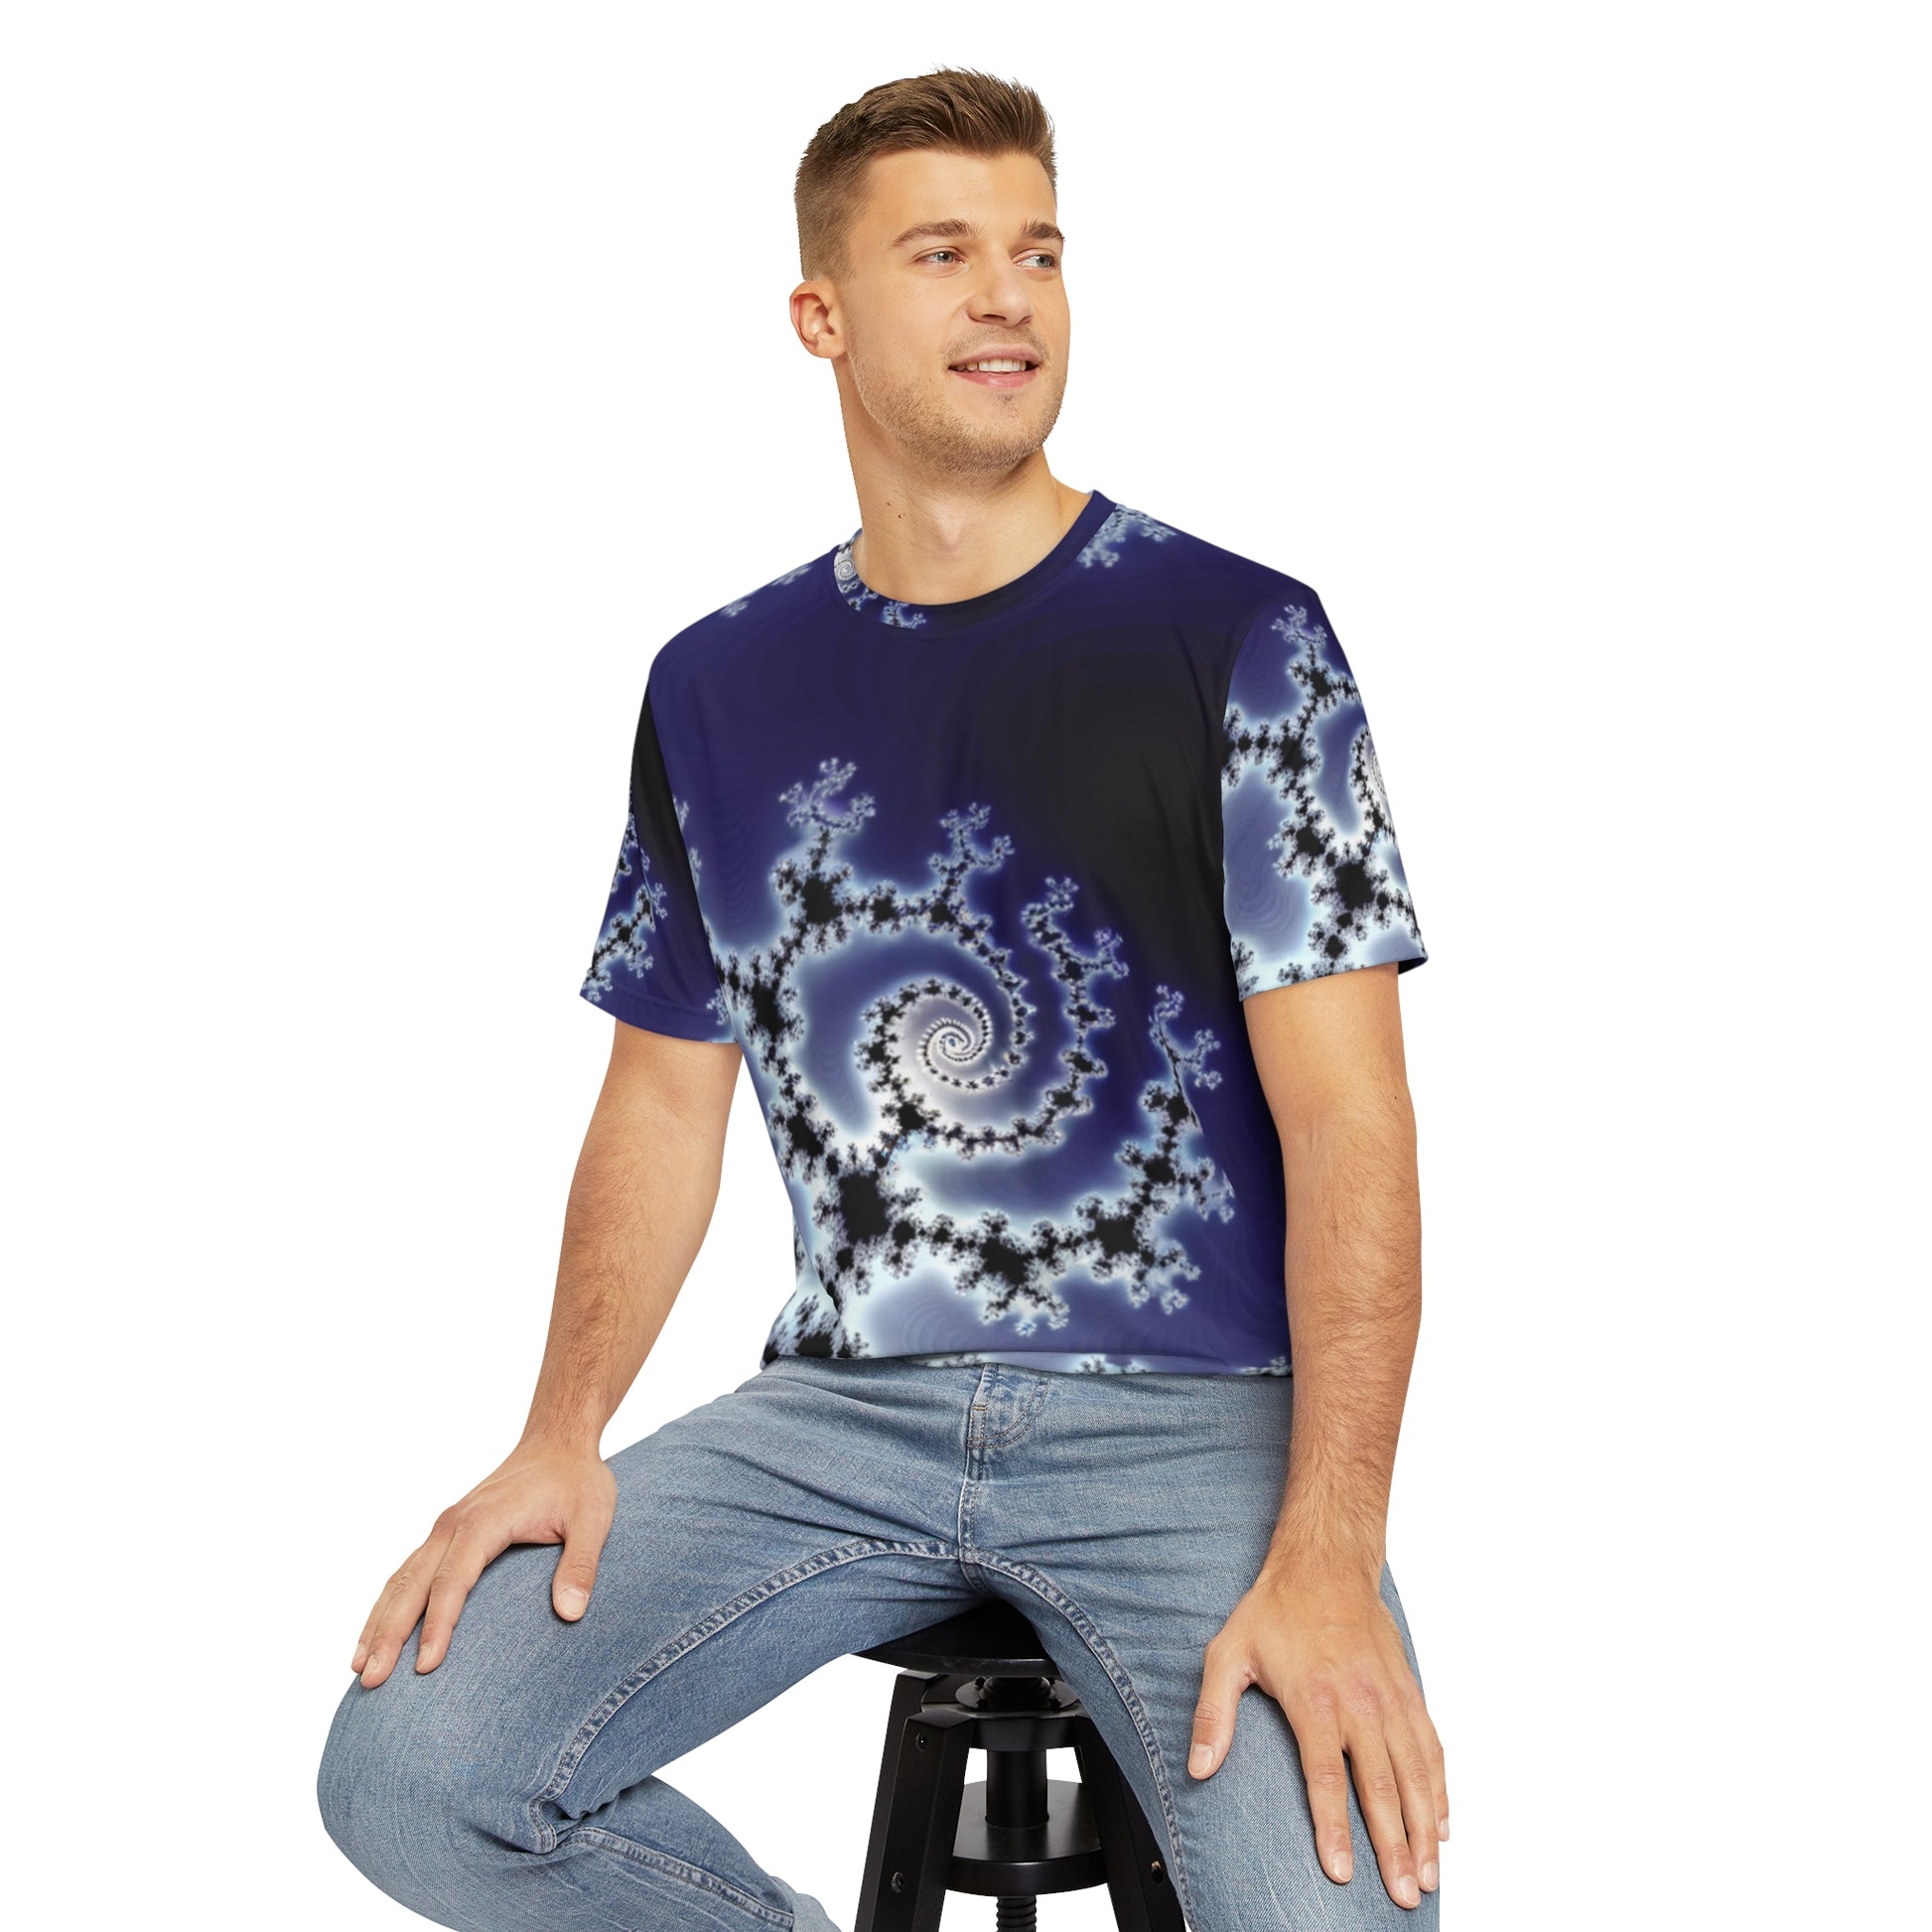 Front view of the Celestial Fractal Elegance Crewneck Pullover All-Over Print Short-Sleeved Shirt purple black white fractal pattern paired with casual denim pants worn by a white man sitting on a stool chair